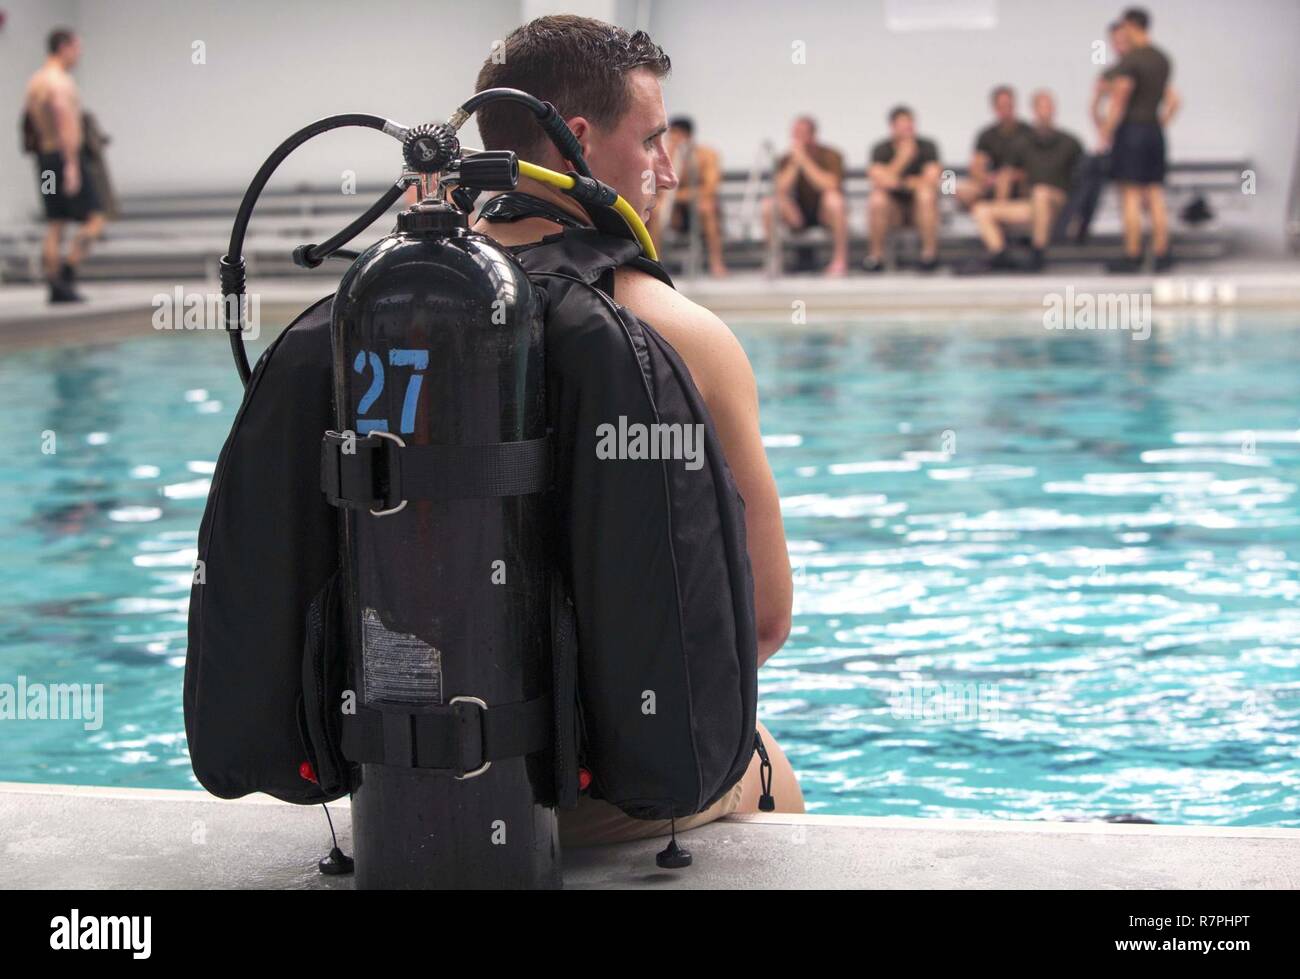 Sgt. Ryan Williams prepares to dive into the pool with a self-contained underwater breathing apparatus during a battalion training event at Camp Lejeune, N.C., March 23, 2017. The training helped Marines enhance their ability to operate in real-world scenarios with scuba gear. Williams is a reconnaissance Marine with 2nd Reconnaissance Battalion, 2nd Marine Division. Stock Photo